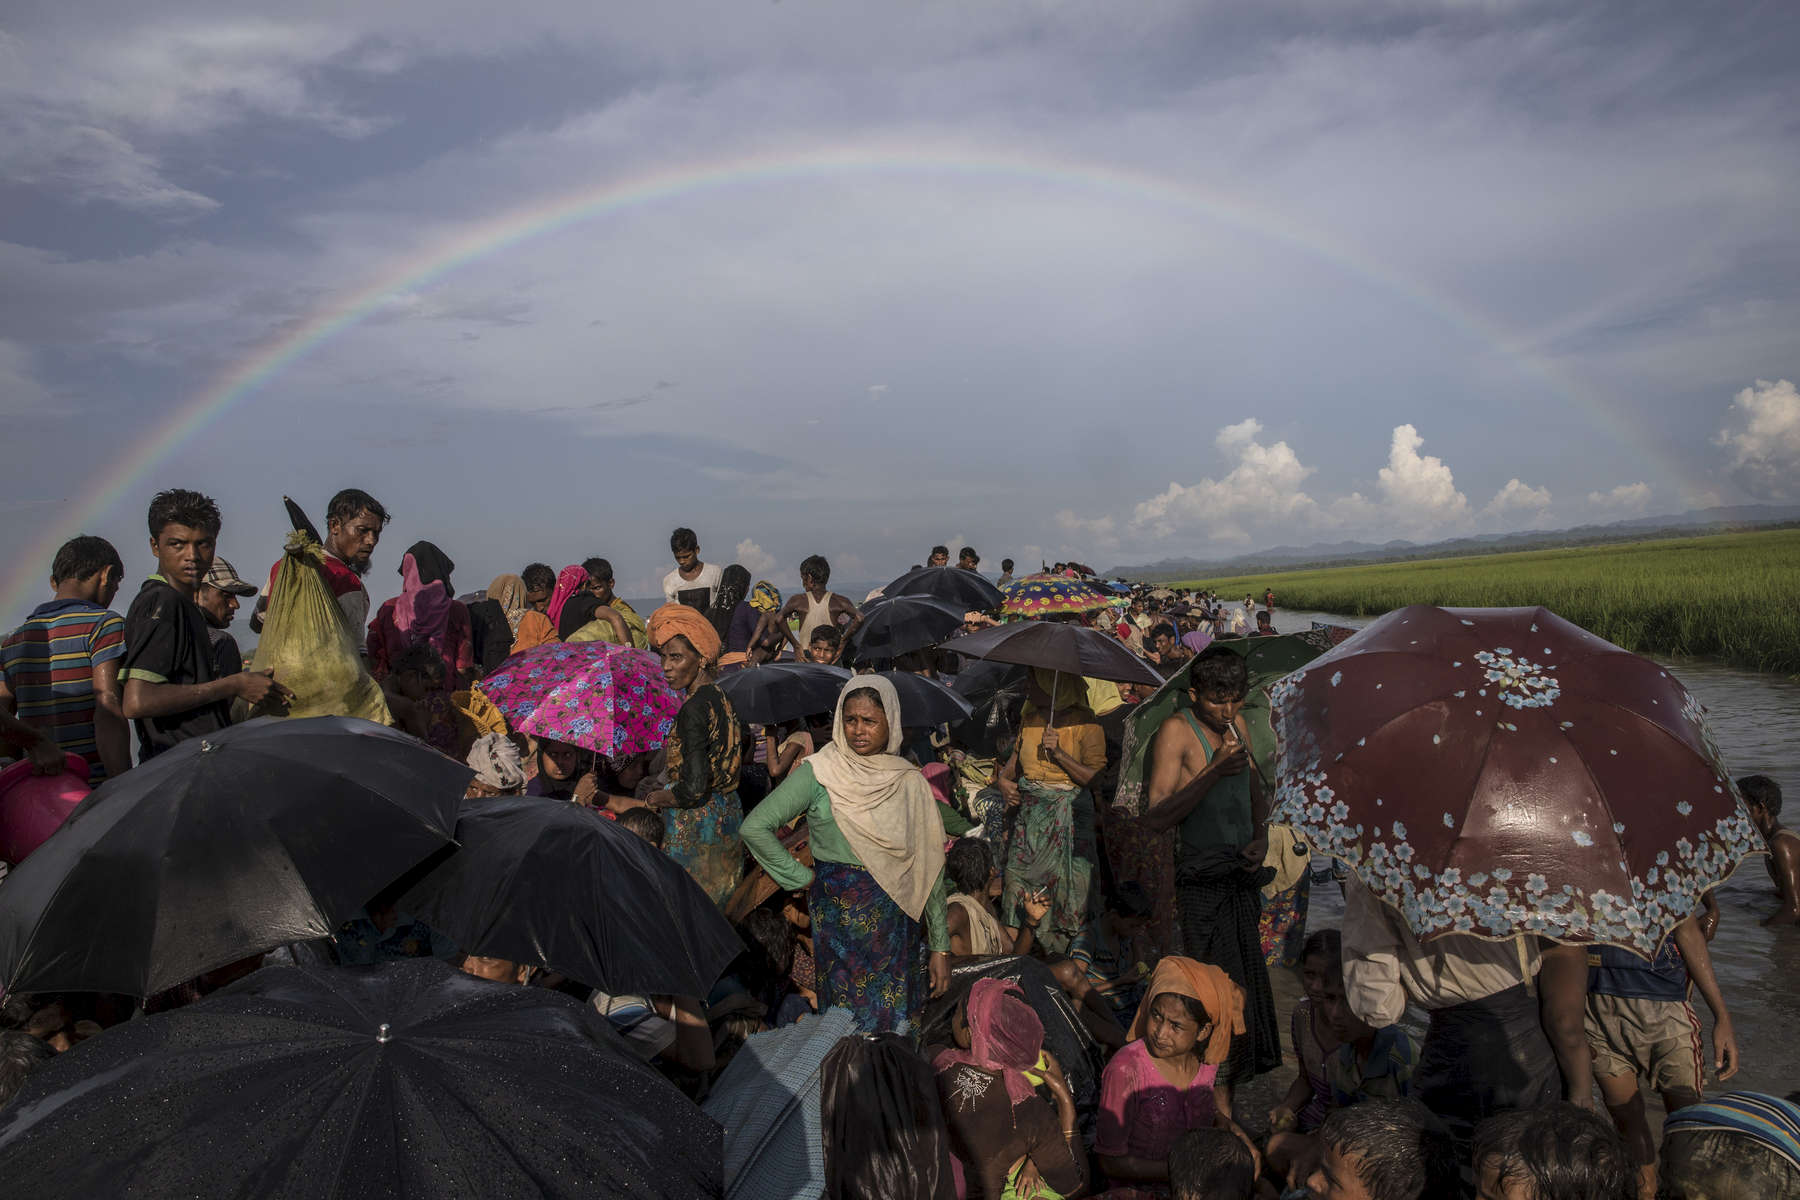 PALONG KHALI, BANGLADESH - OCTOBER 16: Thousands of Rohingya refugees fleeing from Myanmar are  kept under a tight security by Bangladeshi military after crossing the border in a rice patty field near Palang Khali, Cox's Bazar, Bangladesh. A rainbow appeared after a brief rainstorm. Well over a half a million Rohingya refugees have fled into Bangladesh since late August during the outbreak of violence in Rakhine state causing a humanitarian crisis in the region with continued challenges for aid agencies. (Photo by Paula Bronstein/Getty Images)